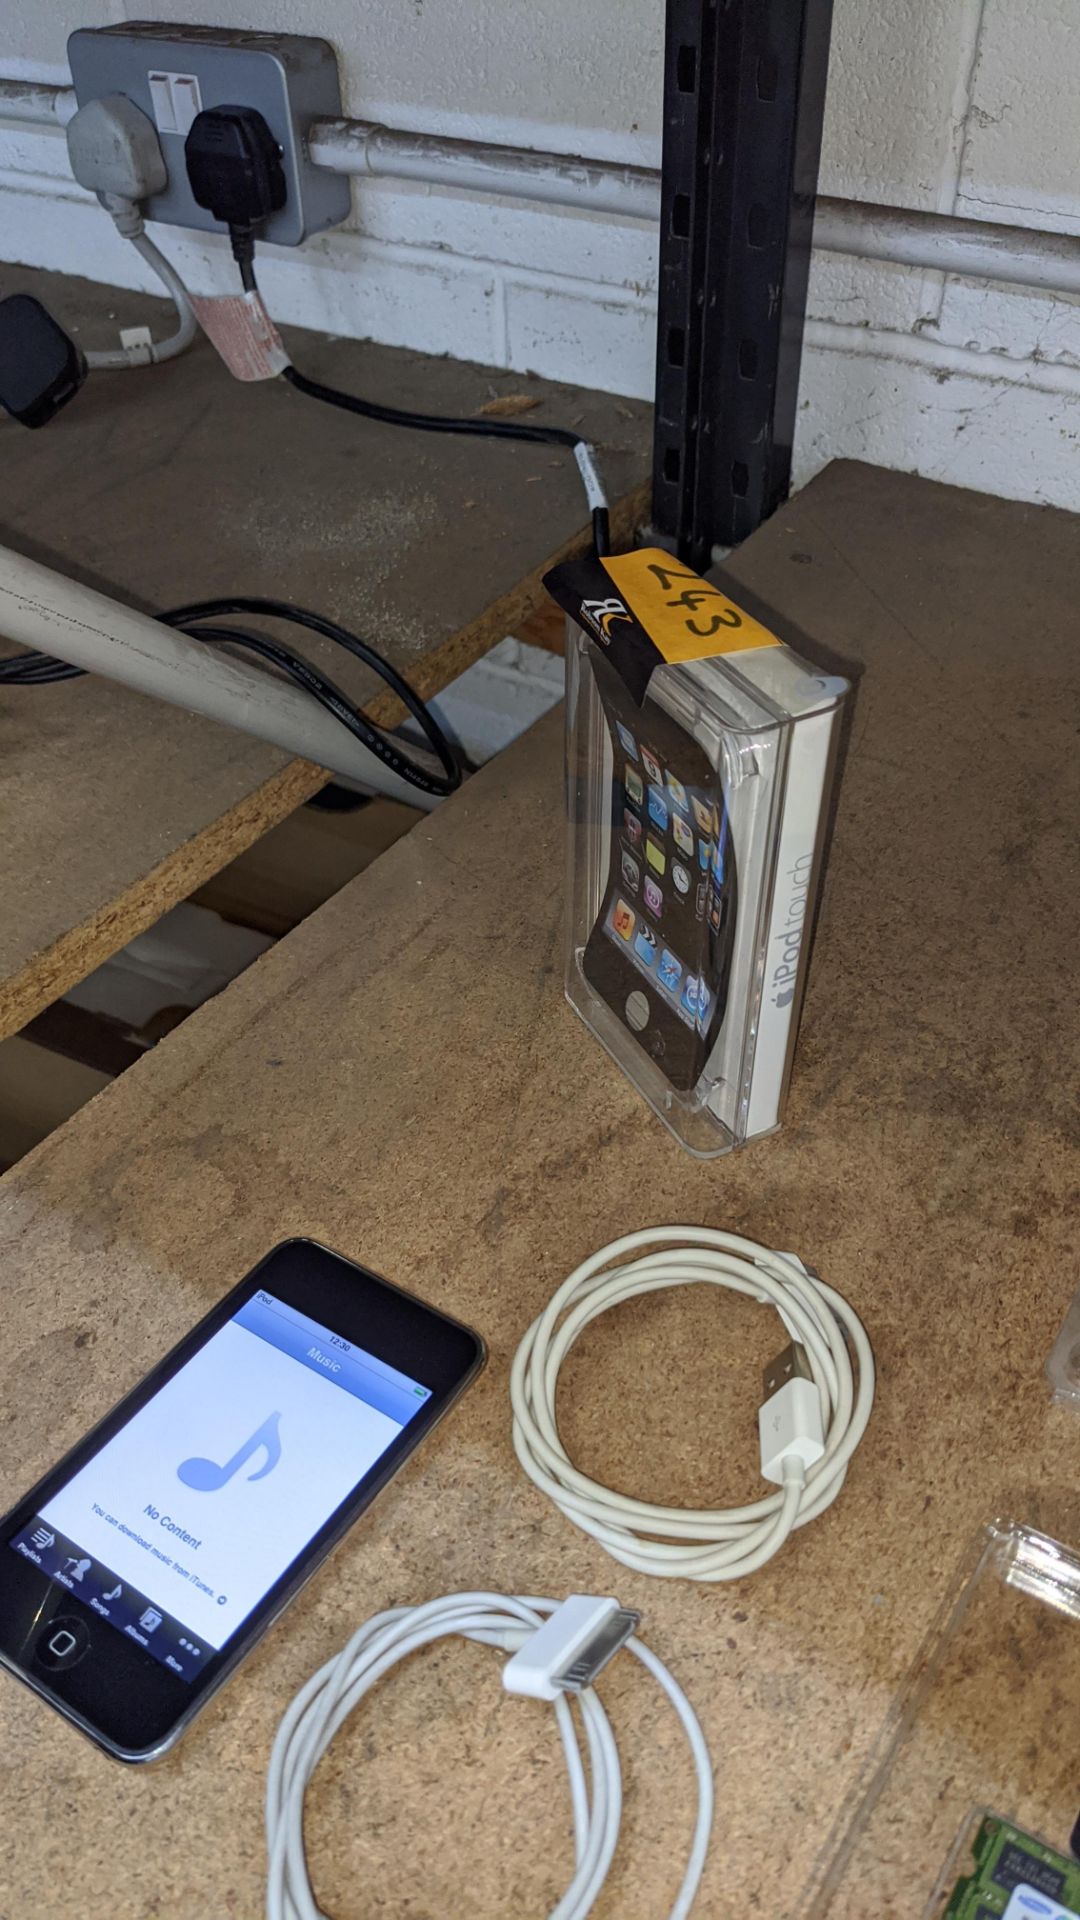 Apple iPod Touch Second Generation 32GB model A1318/EMC2310. Includes 2 off Apple cables plus box - Image 15 of 15